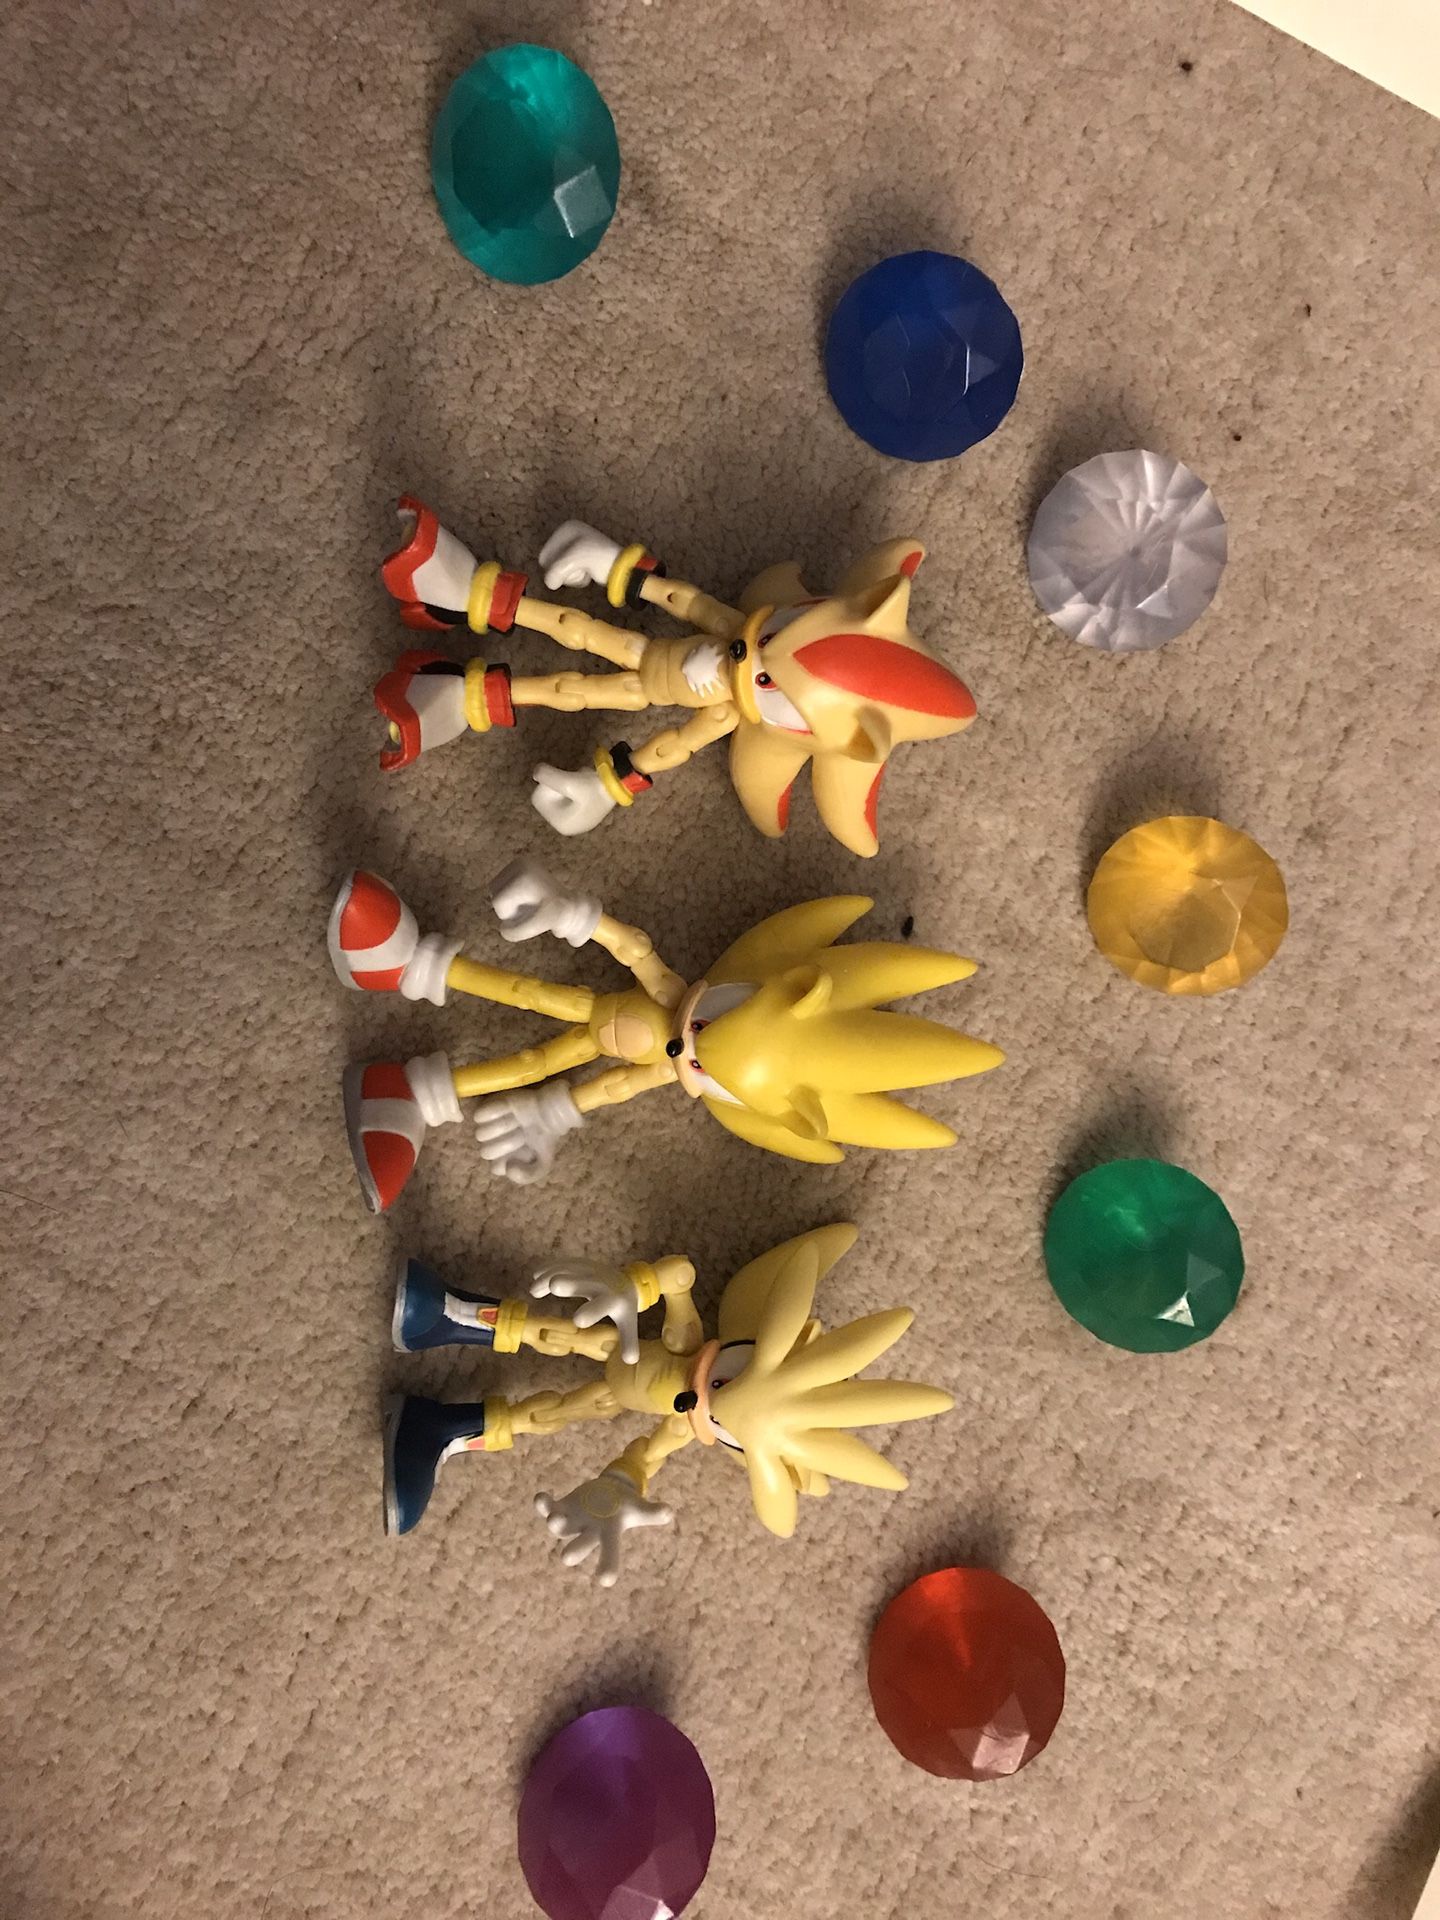 Sonic the hedgehog super pack action figures including 7 chaos emeralds